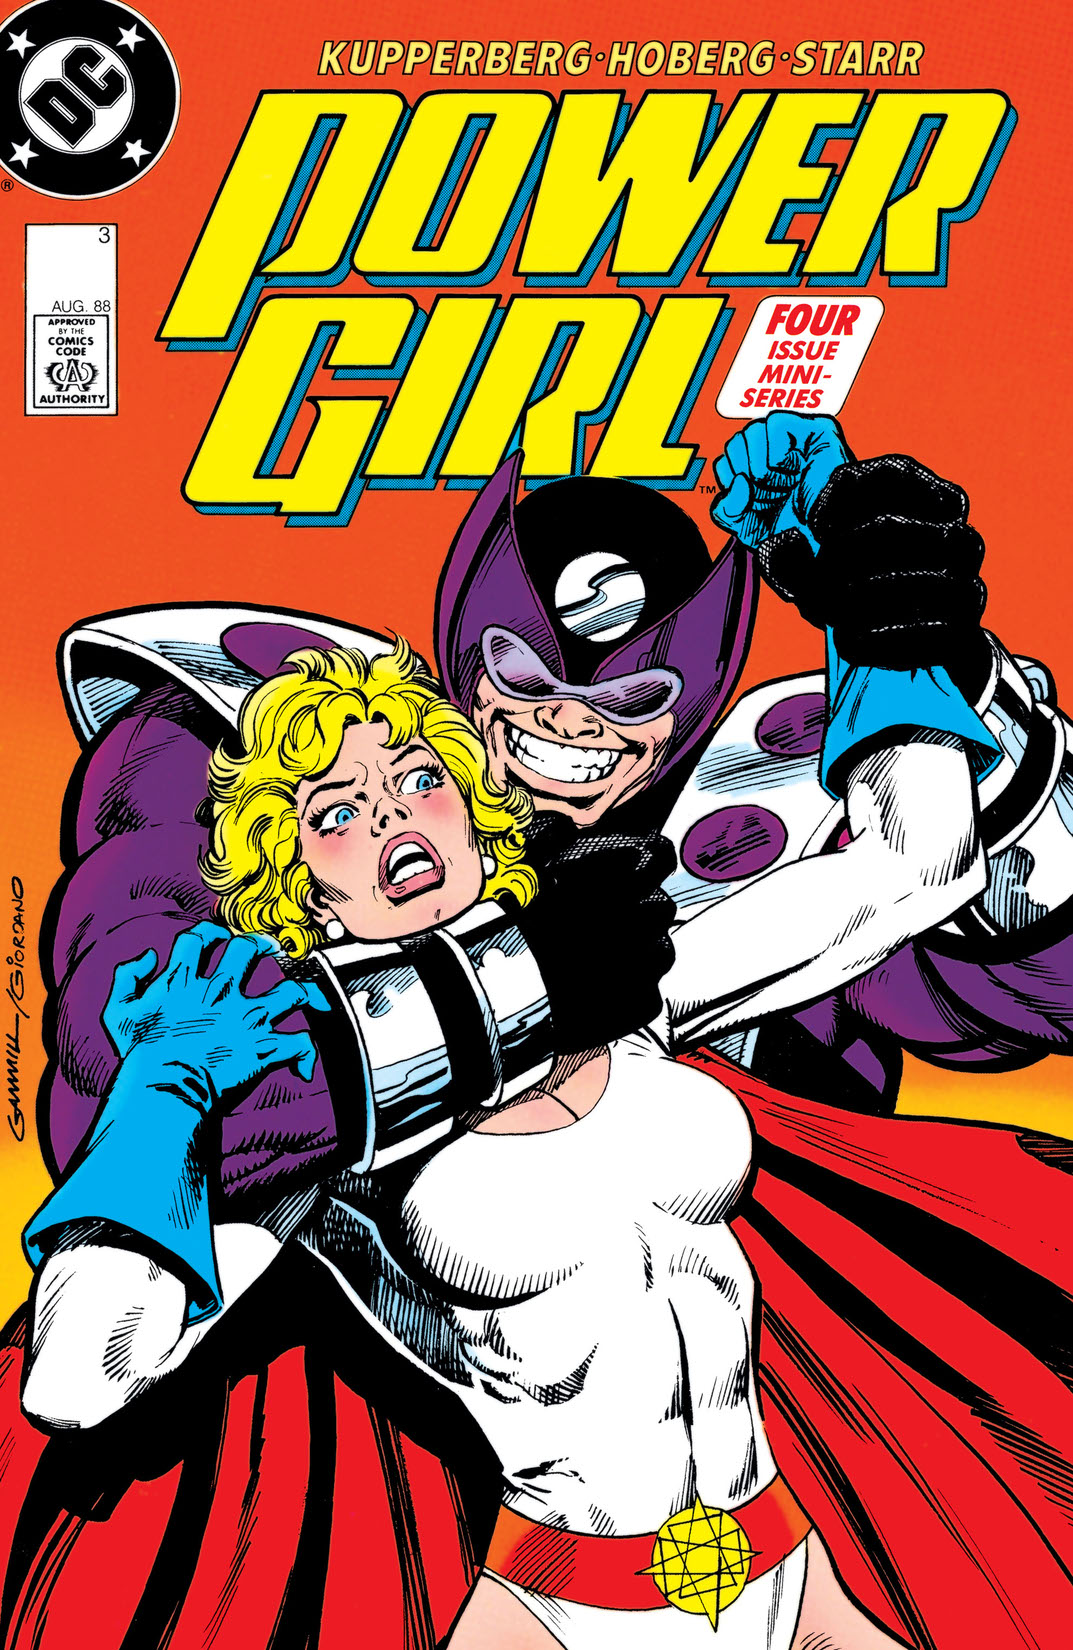 Power Girl (1988-) #3 preview images